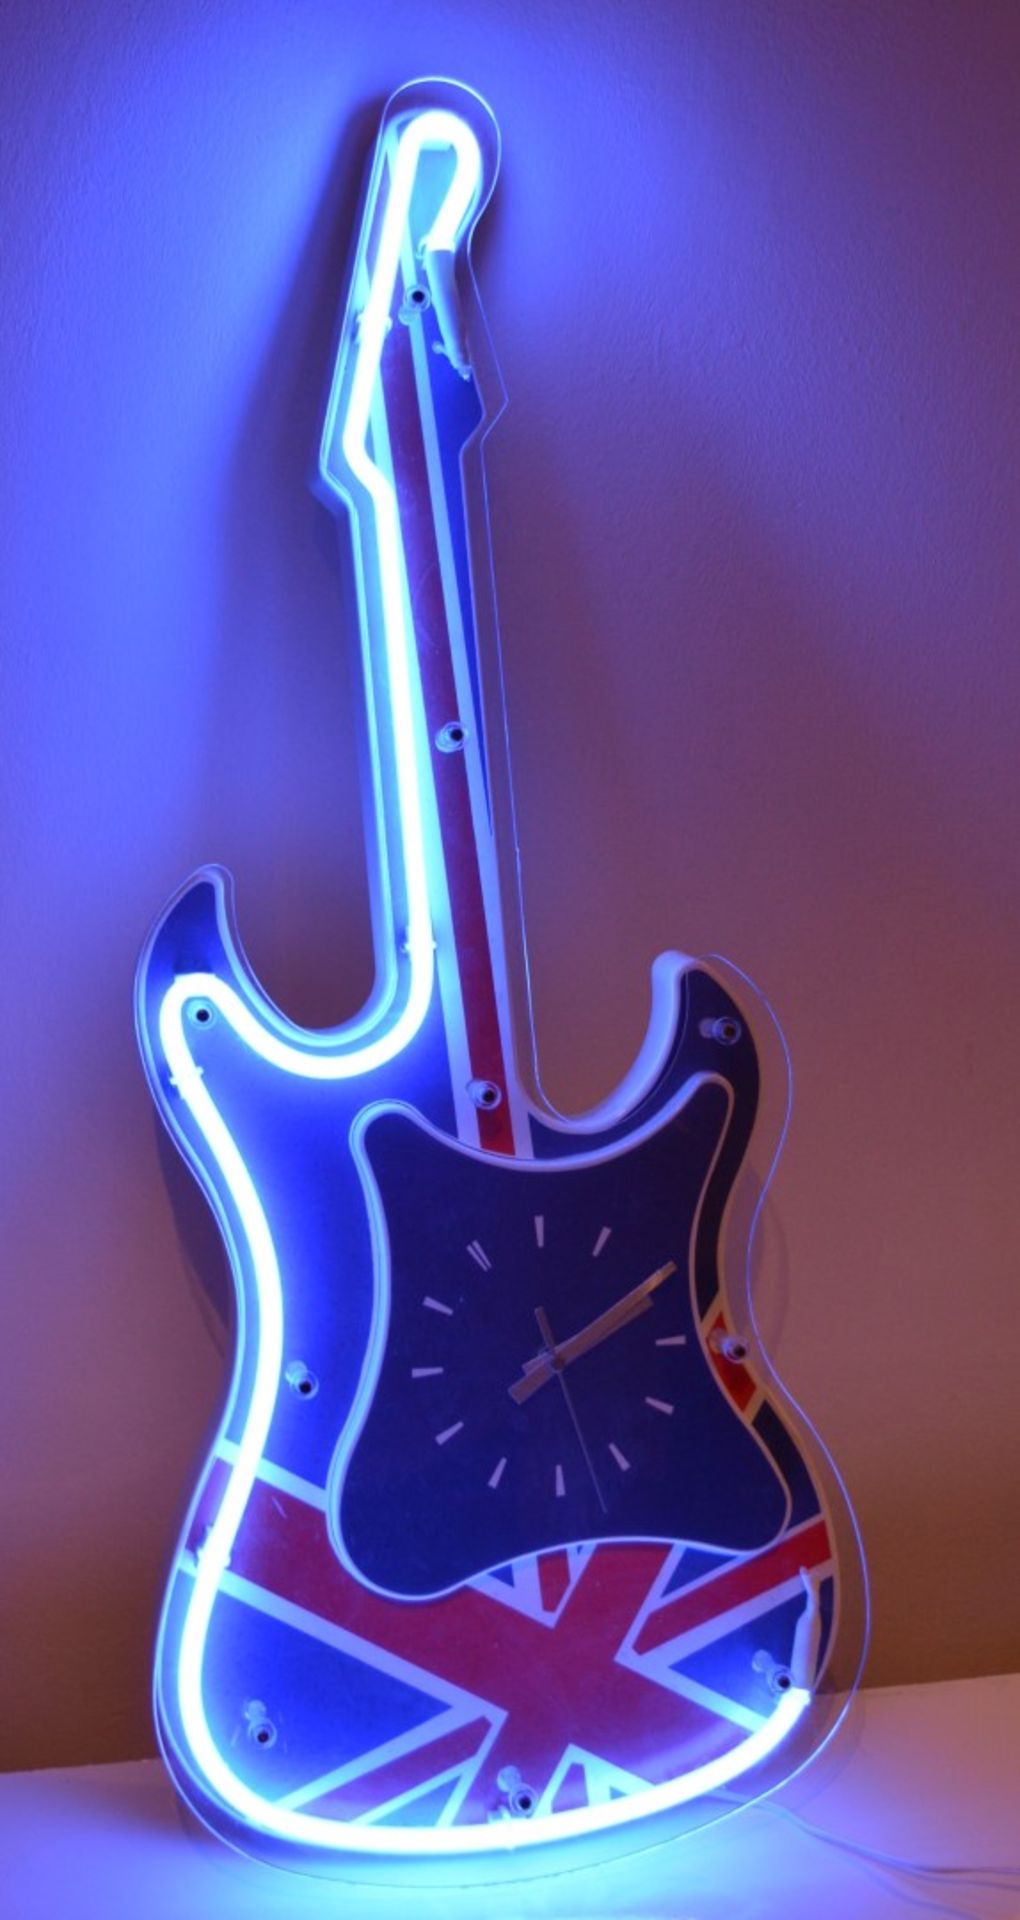 1 x Illuminated Neon Britpop Union Jack Guitar Shaped Clock - Preowned In Good Working Condition -